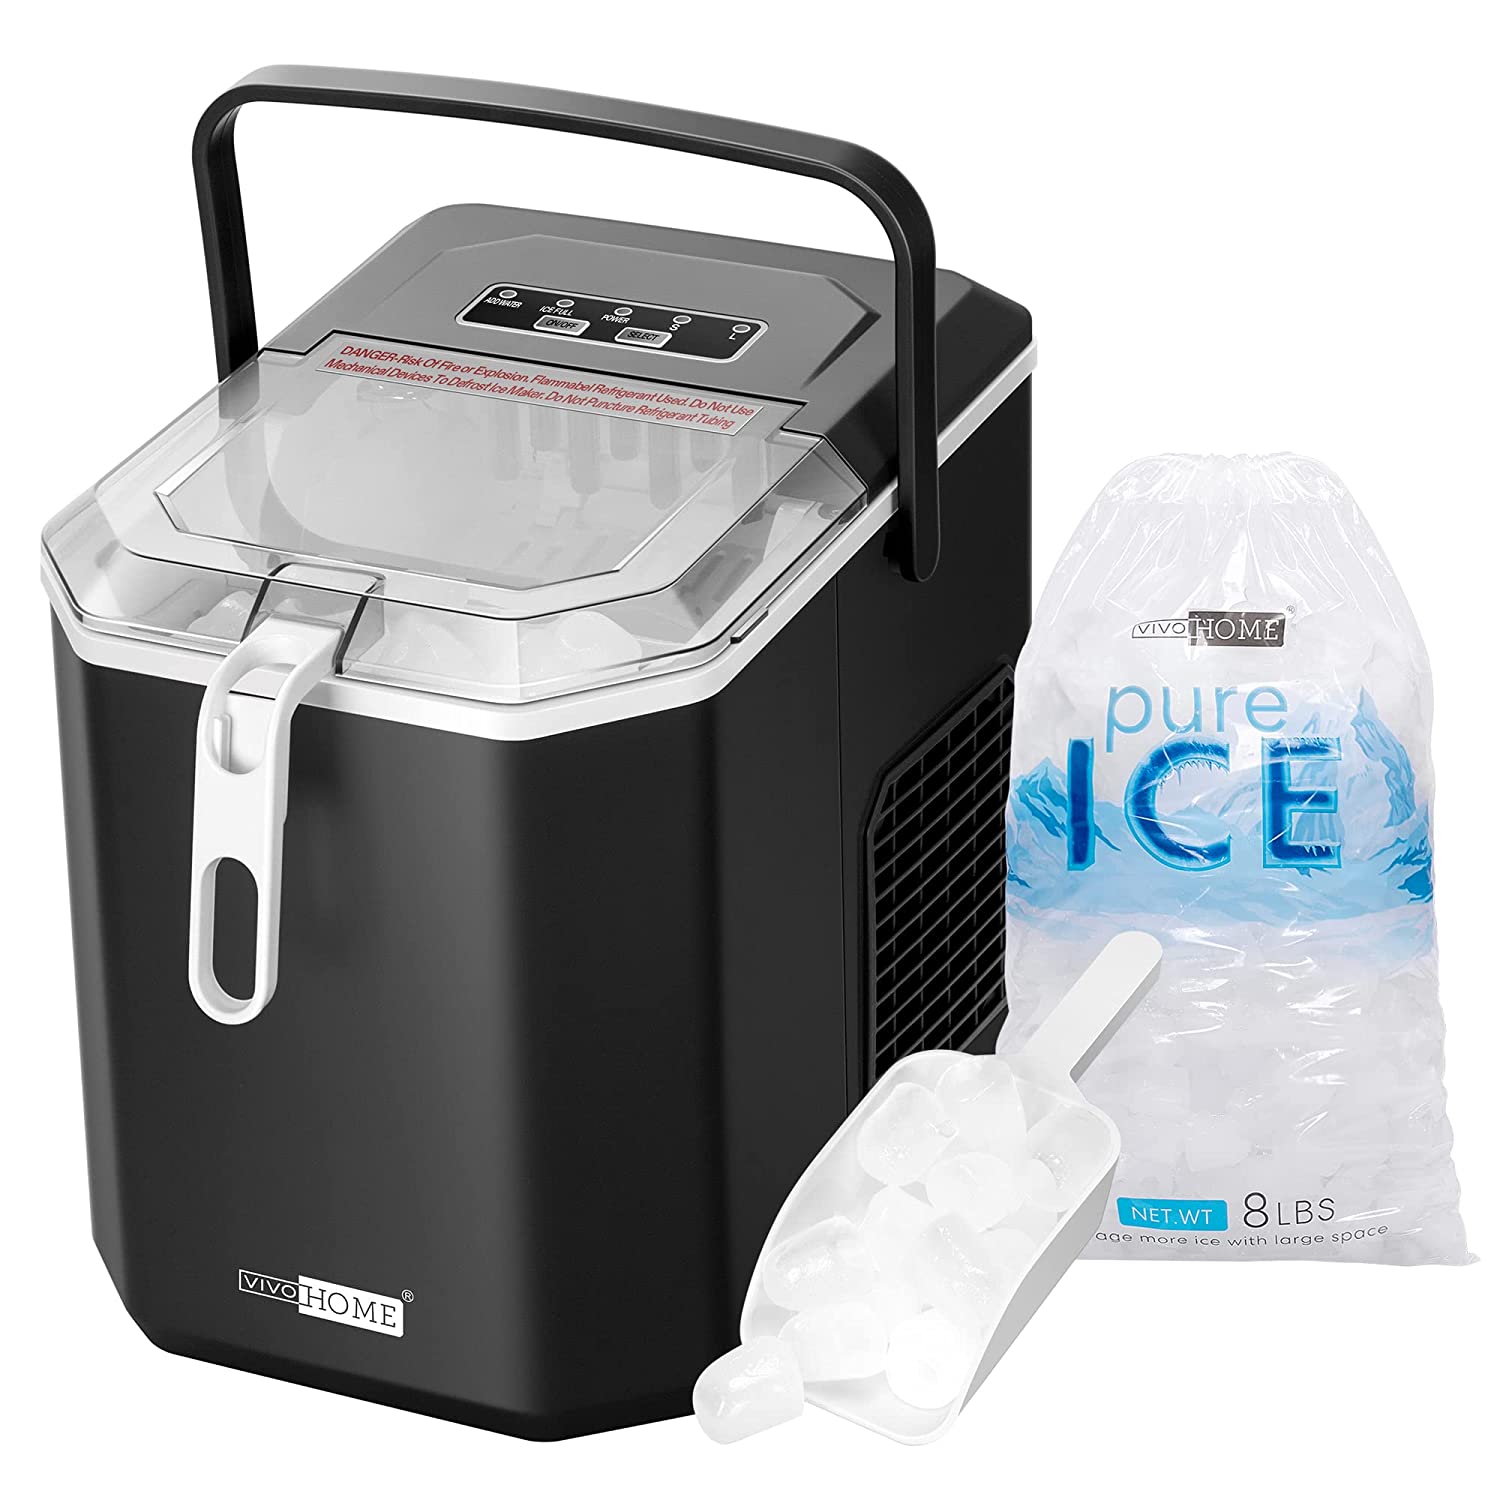 VIVOHOME Electric Portable Compact Countertop Automatic Ice Cube Maker Machine with Handle Hand Scoop 10 Ice Bags and Self Cleaning Function 26.5lbs